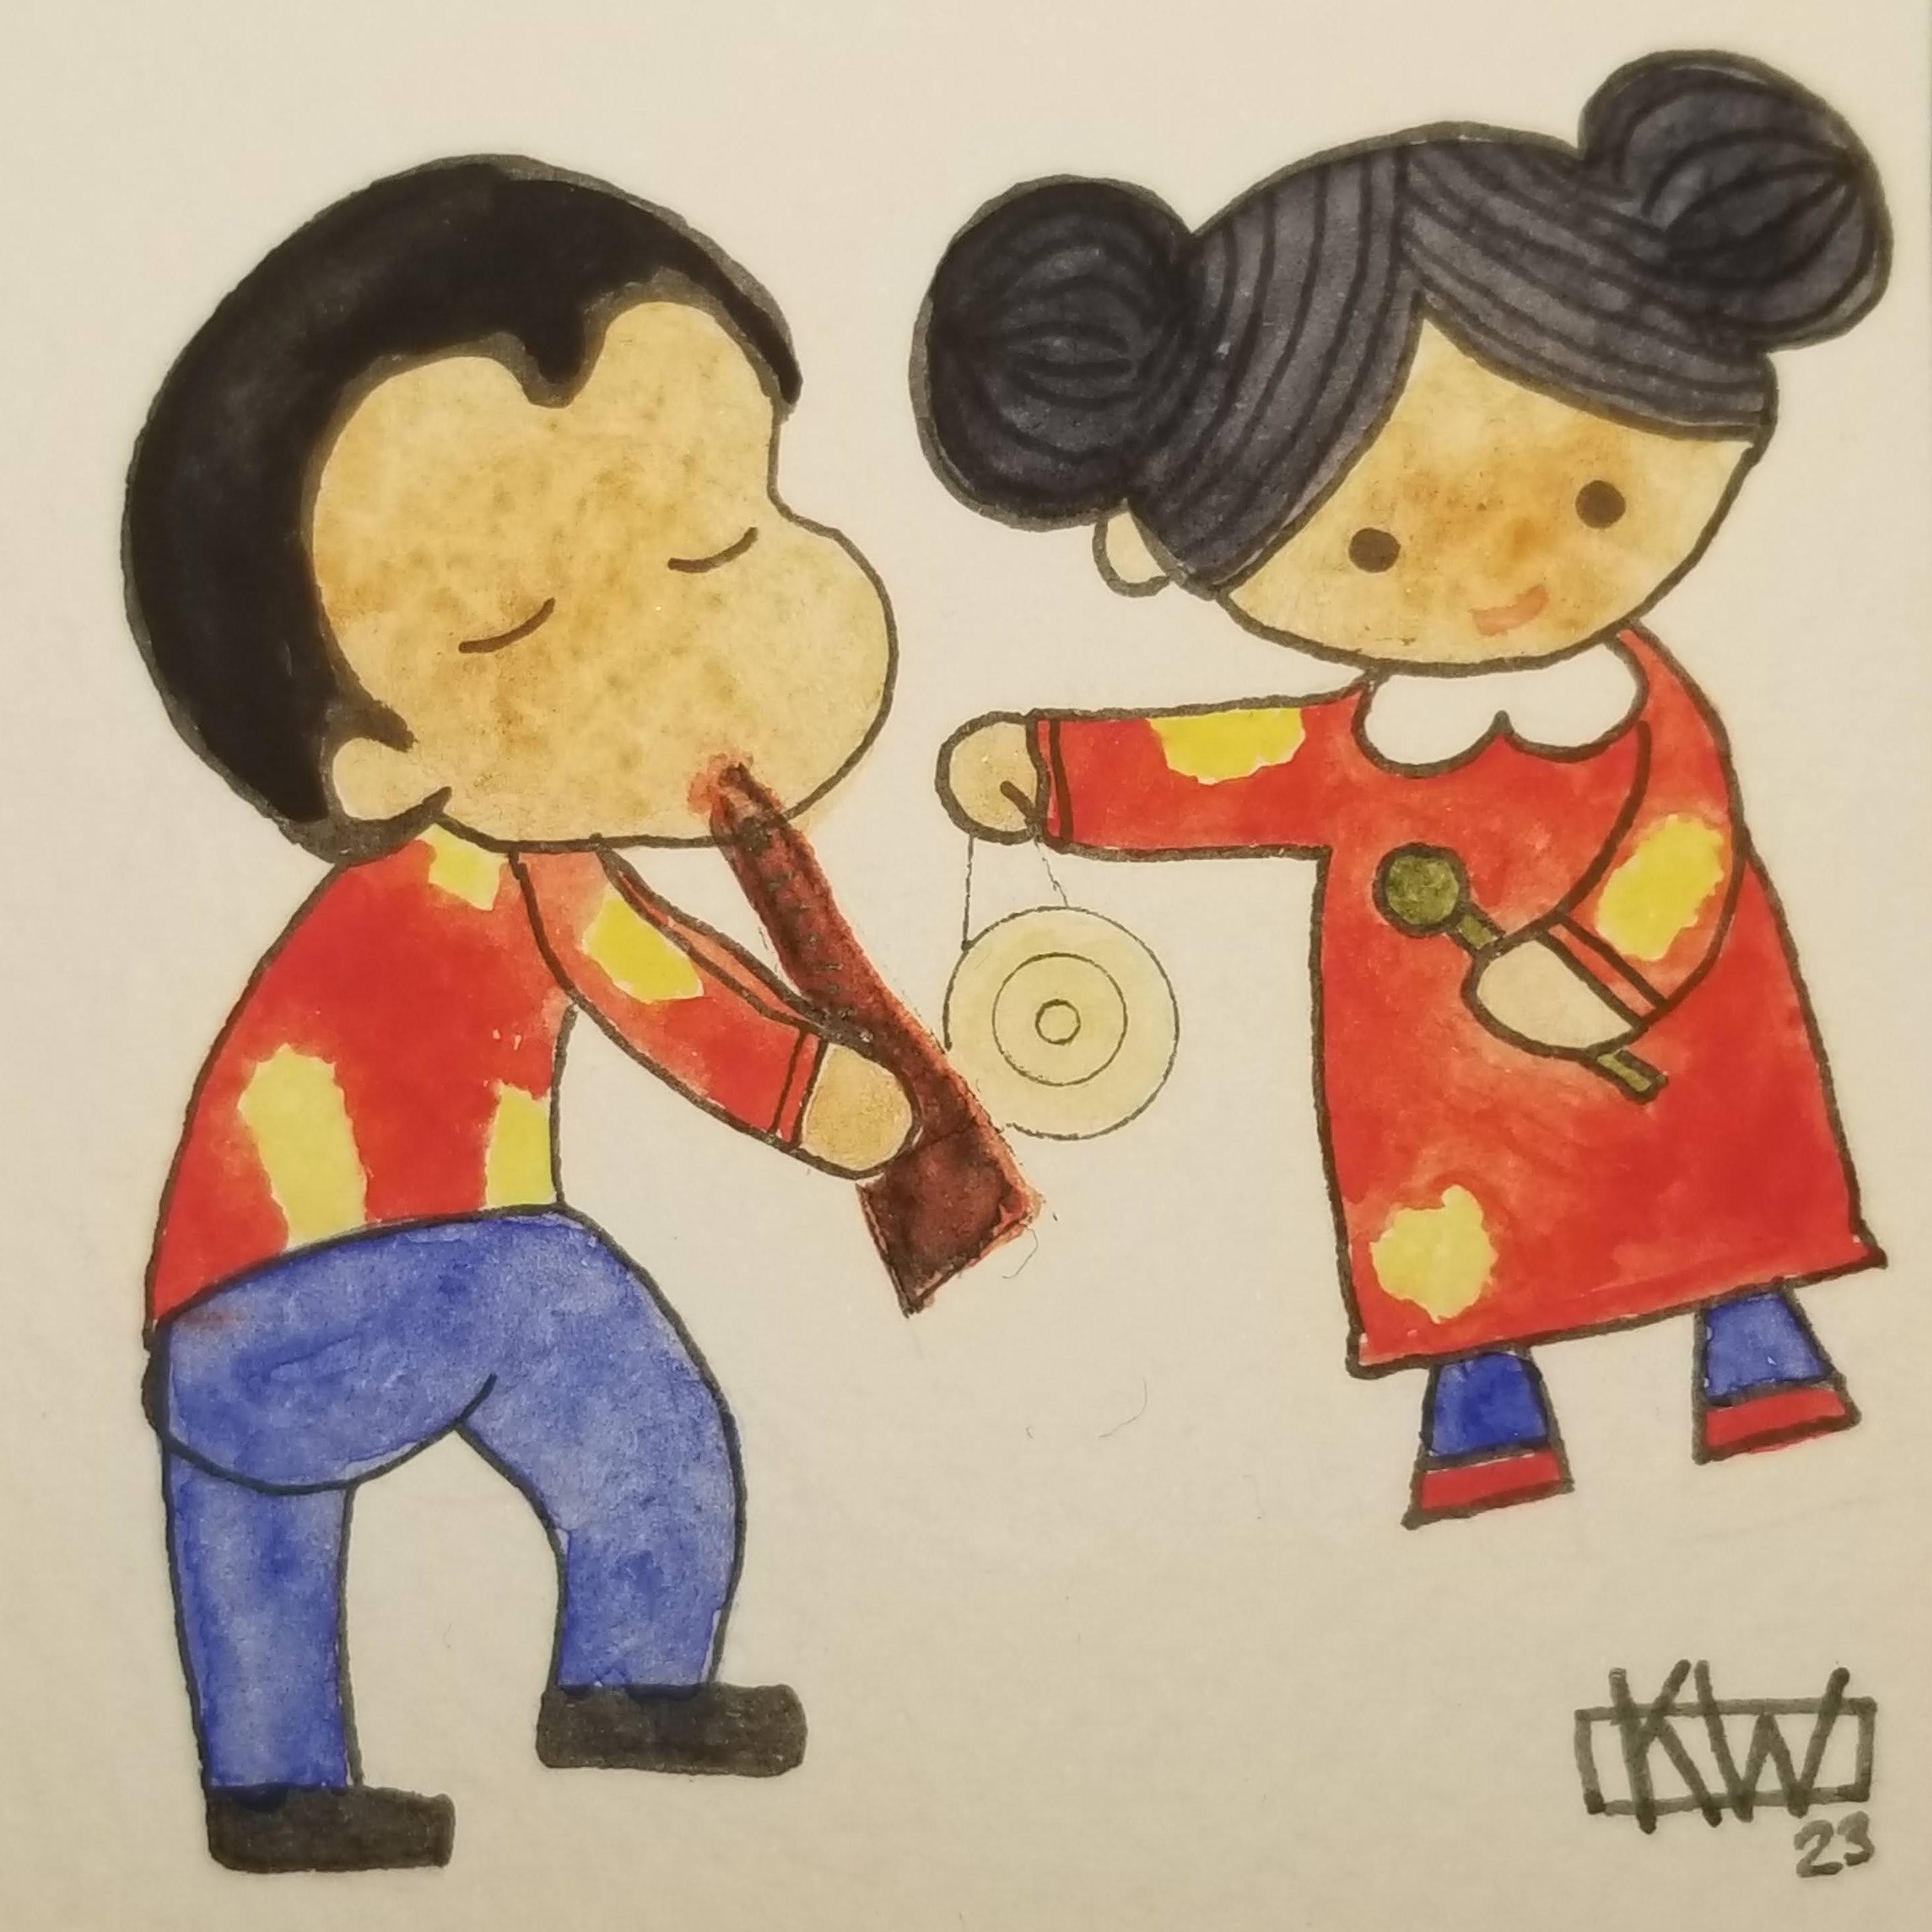 2 Watercolor children in bright red clothing play a flute & gong while dancing.